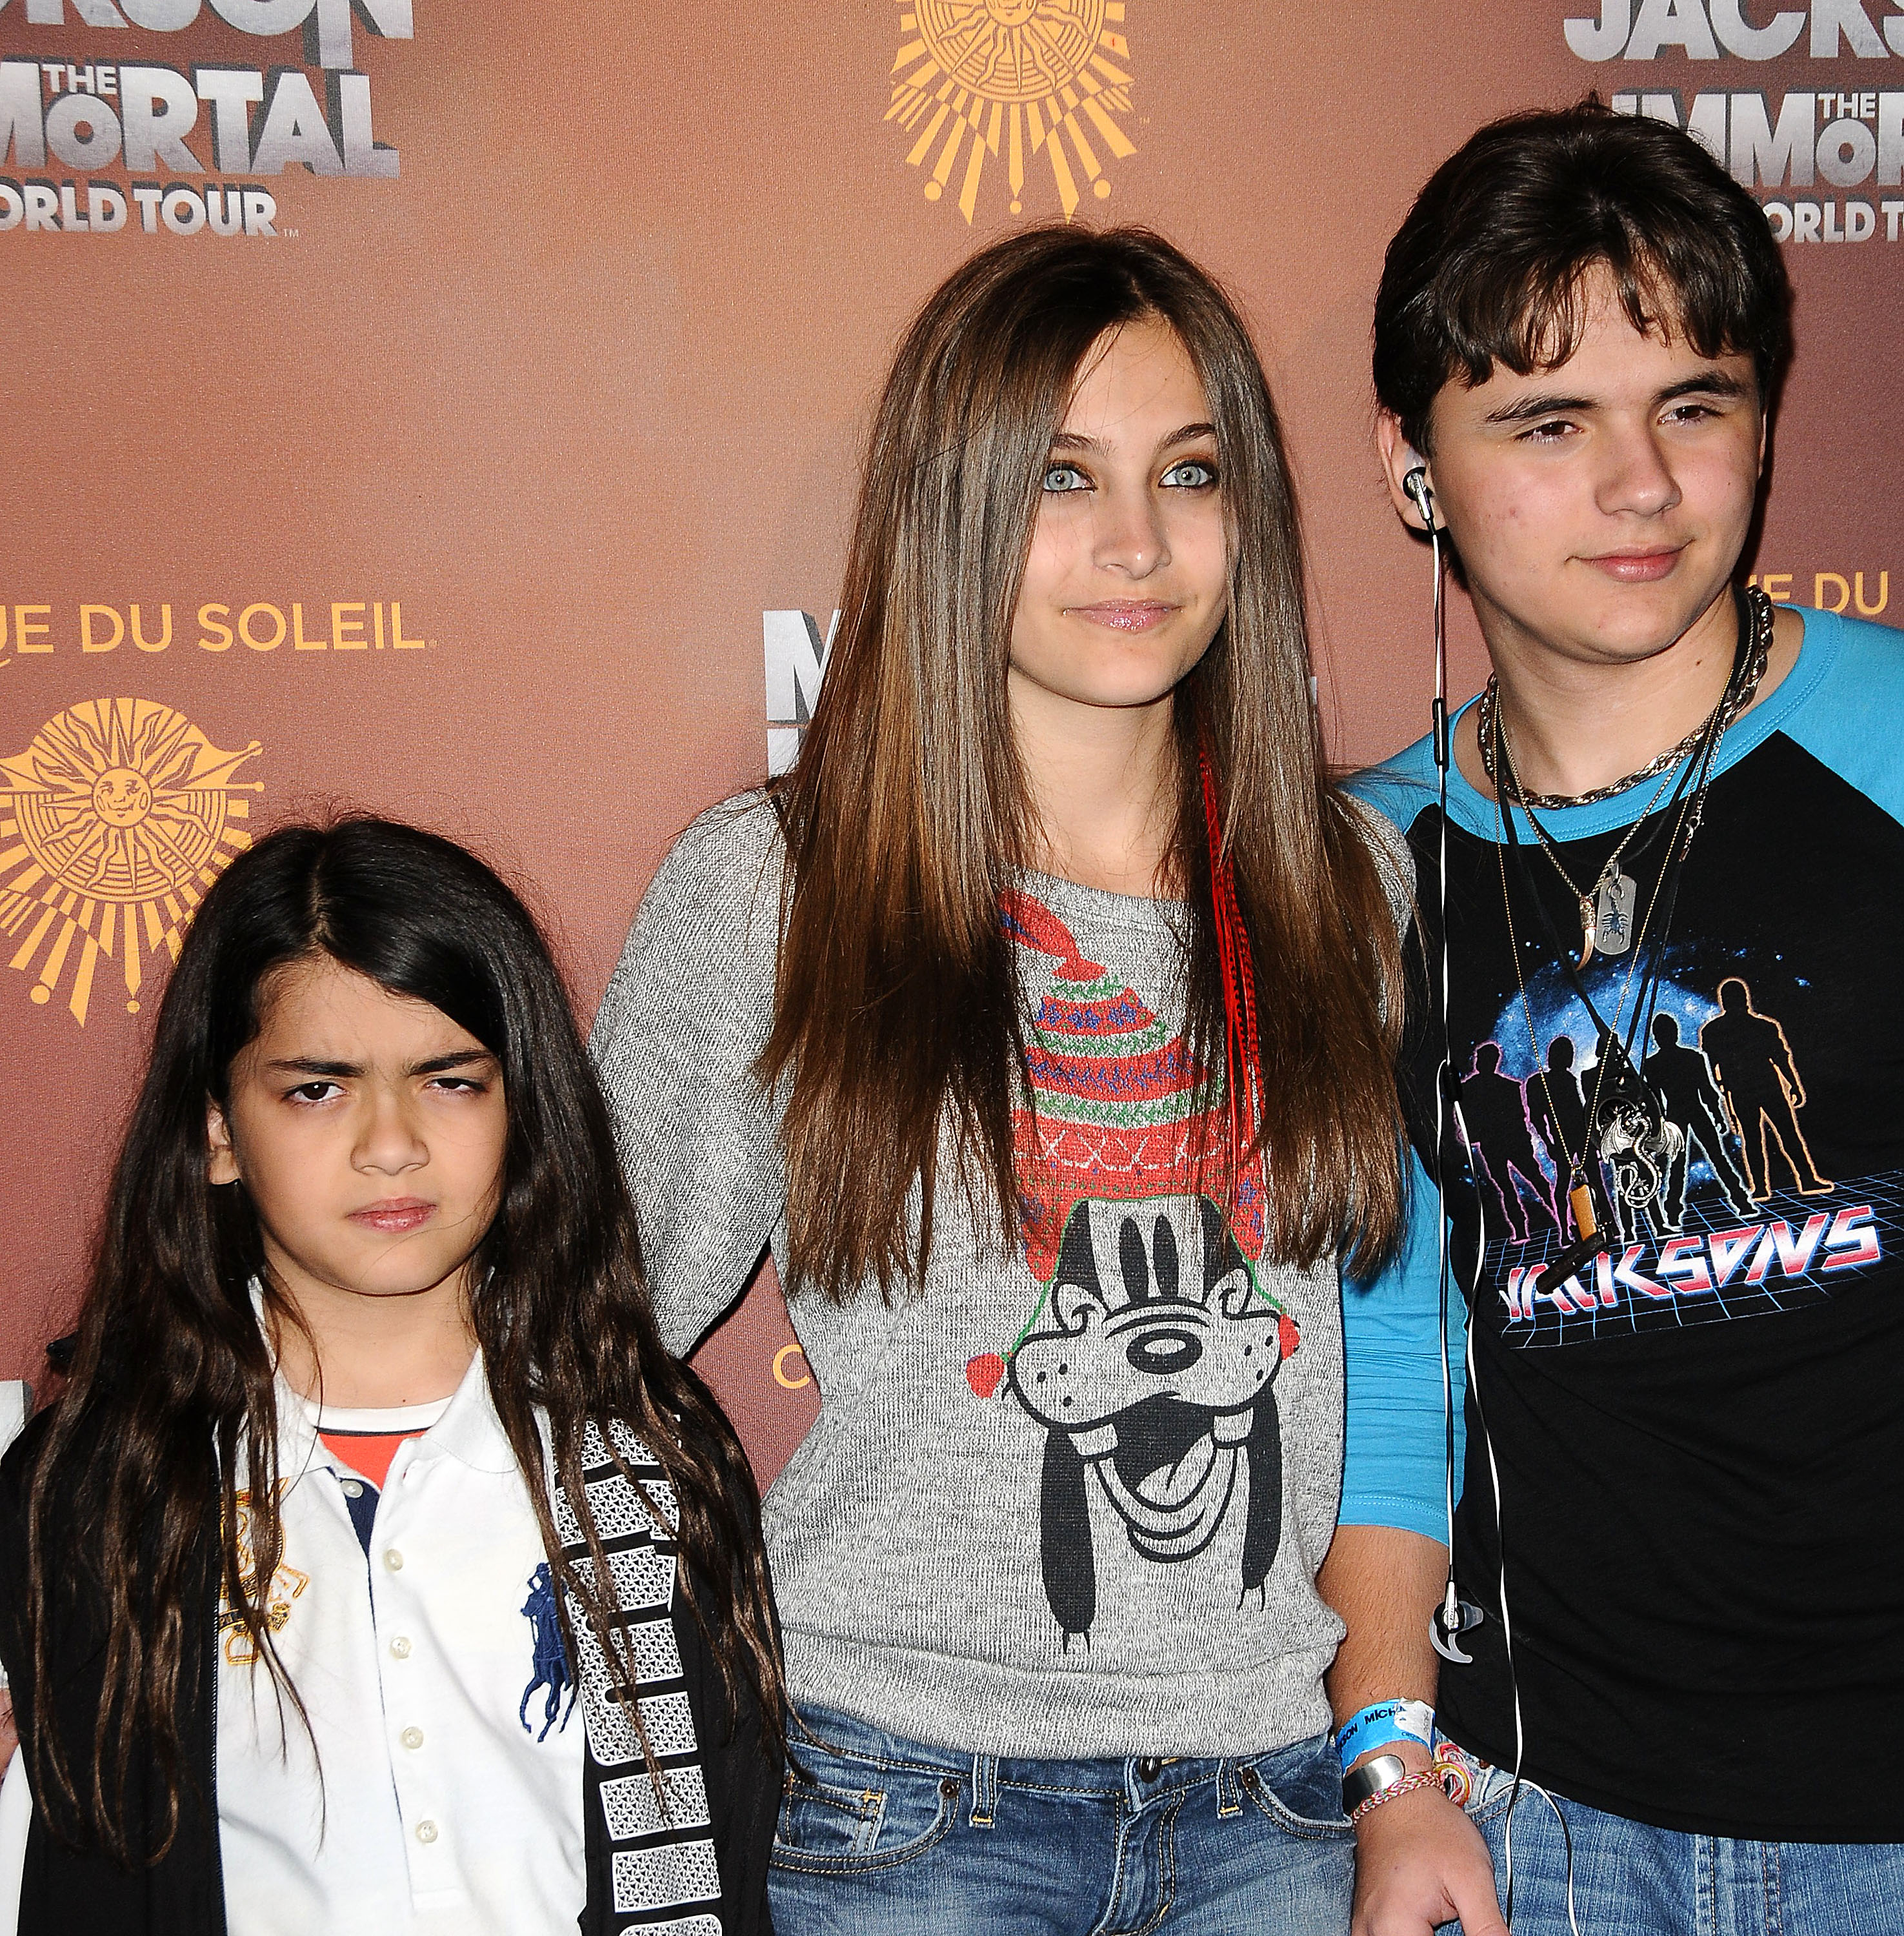 Prince Michael Jackson II, Paris Jackson, and Prince Jackson at the Los Angeles opening of "Michael Jackson THE IMMORTAL World Tour" on January 27, 2012. | Source: Getty Images